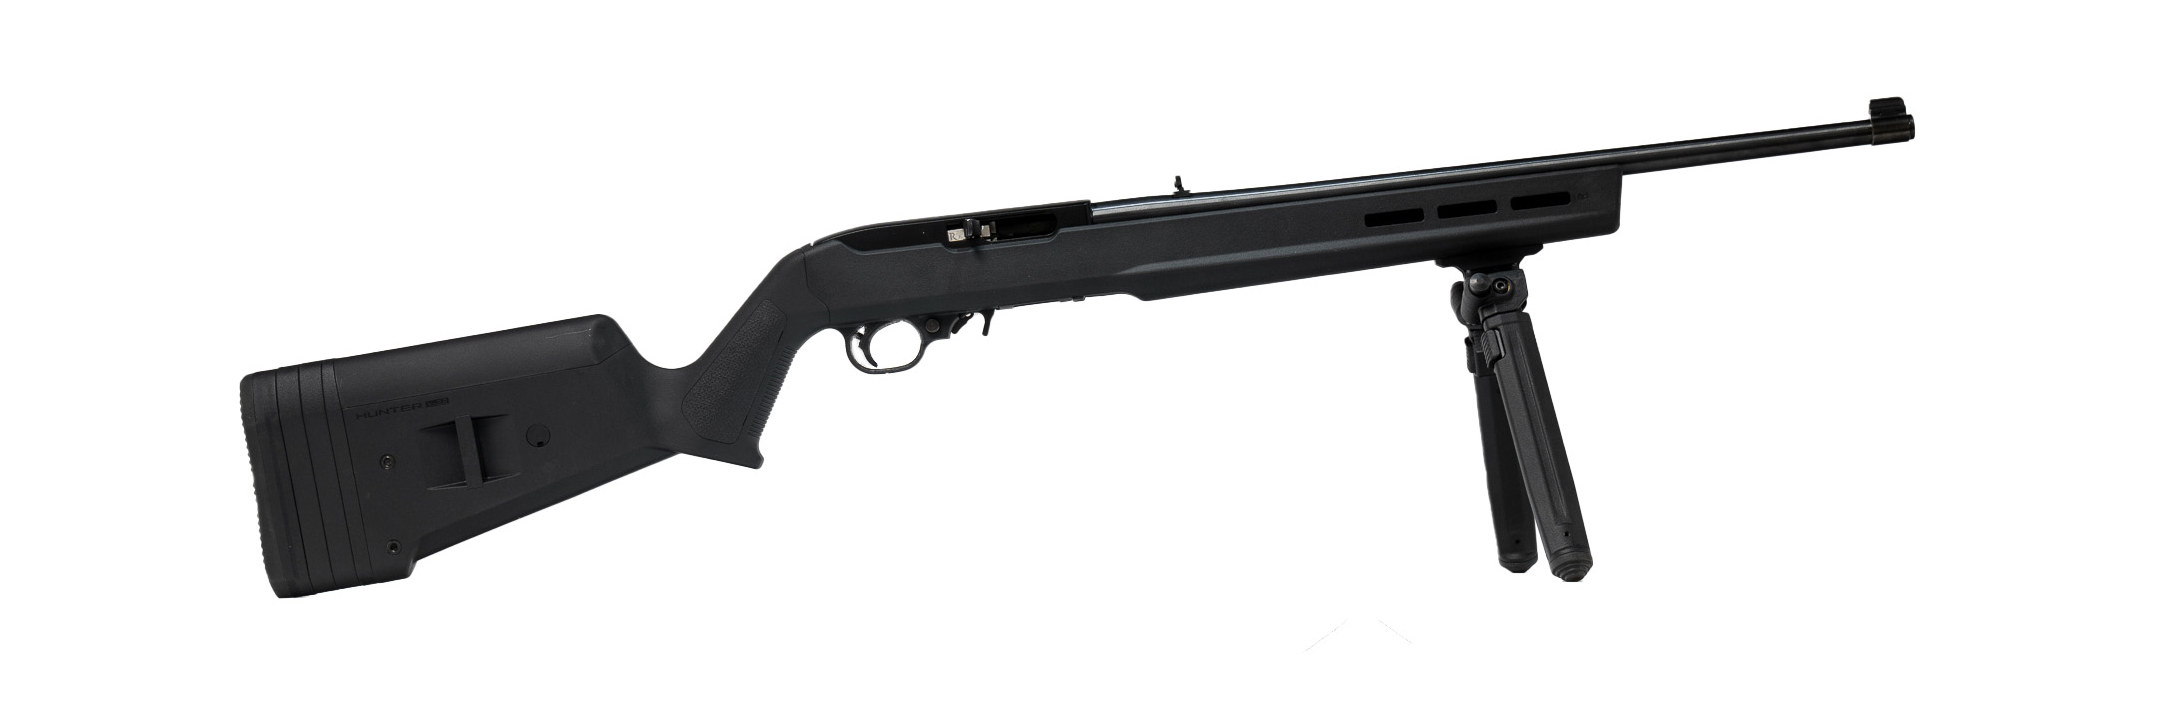 Magpul Ruger 10/22 .22LR Semi-Auto Rifle (OUT OF ORDER) (Code R018)-image